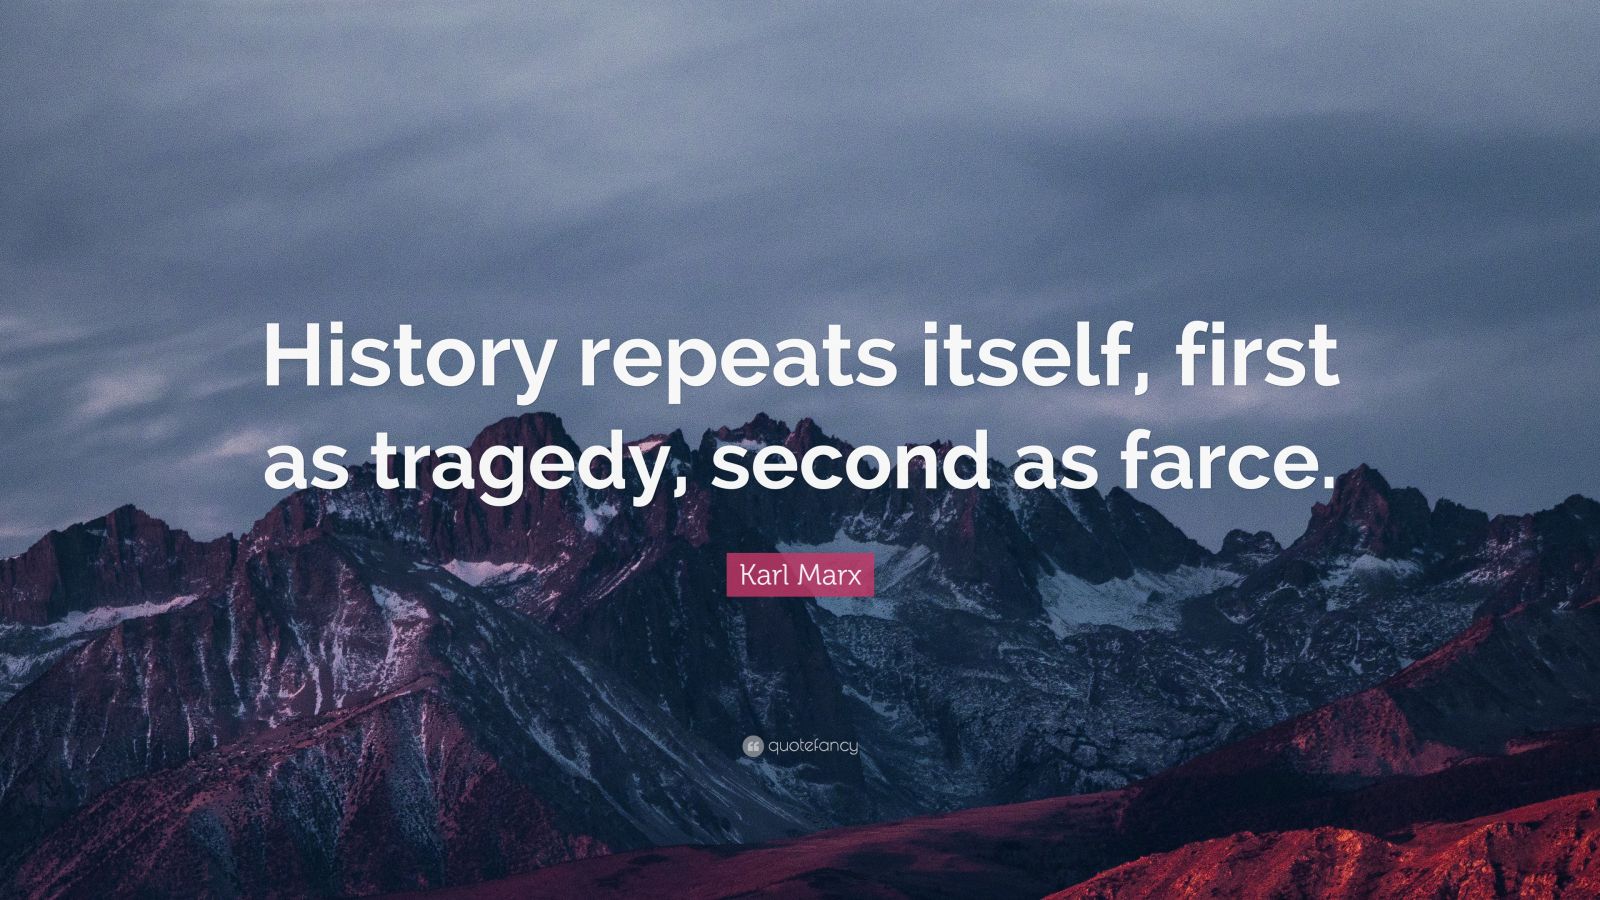 Karl Marx Quote “History repeats itself, first as tragedy, second as